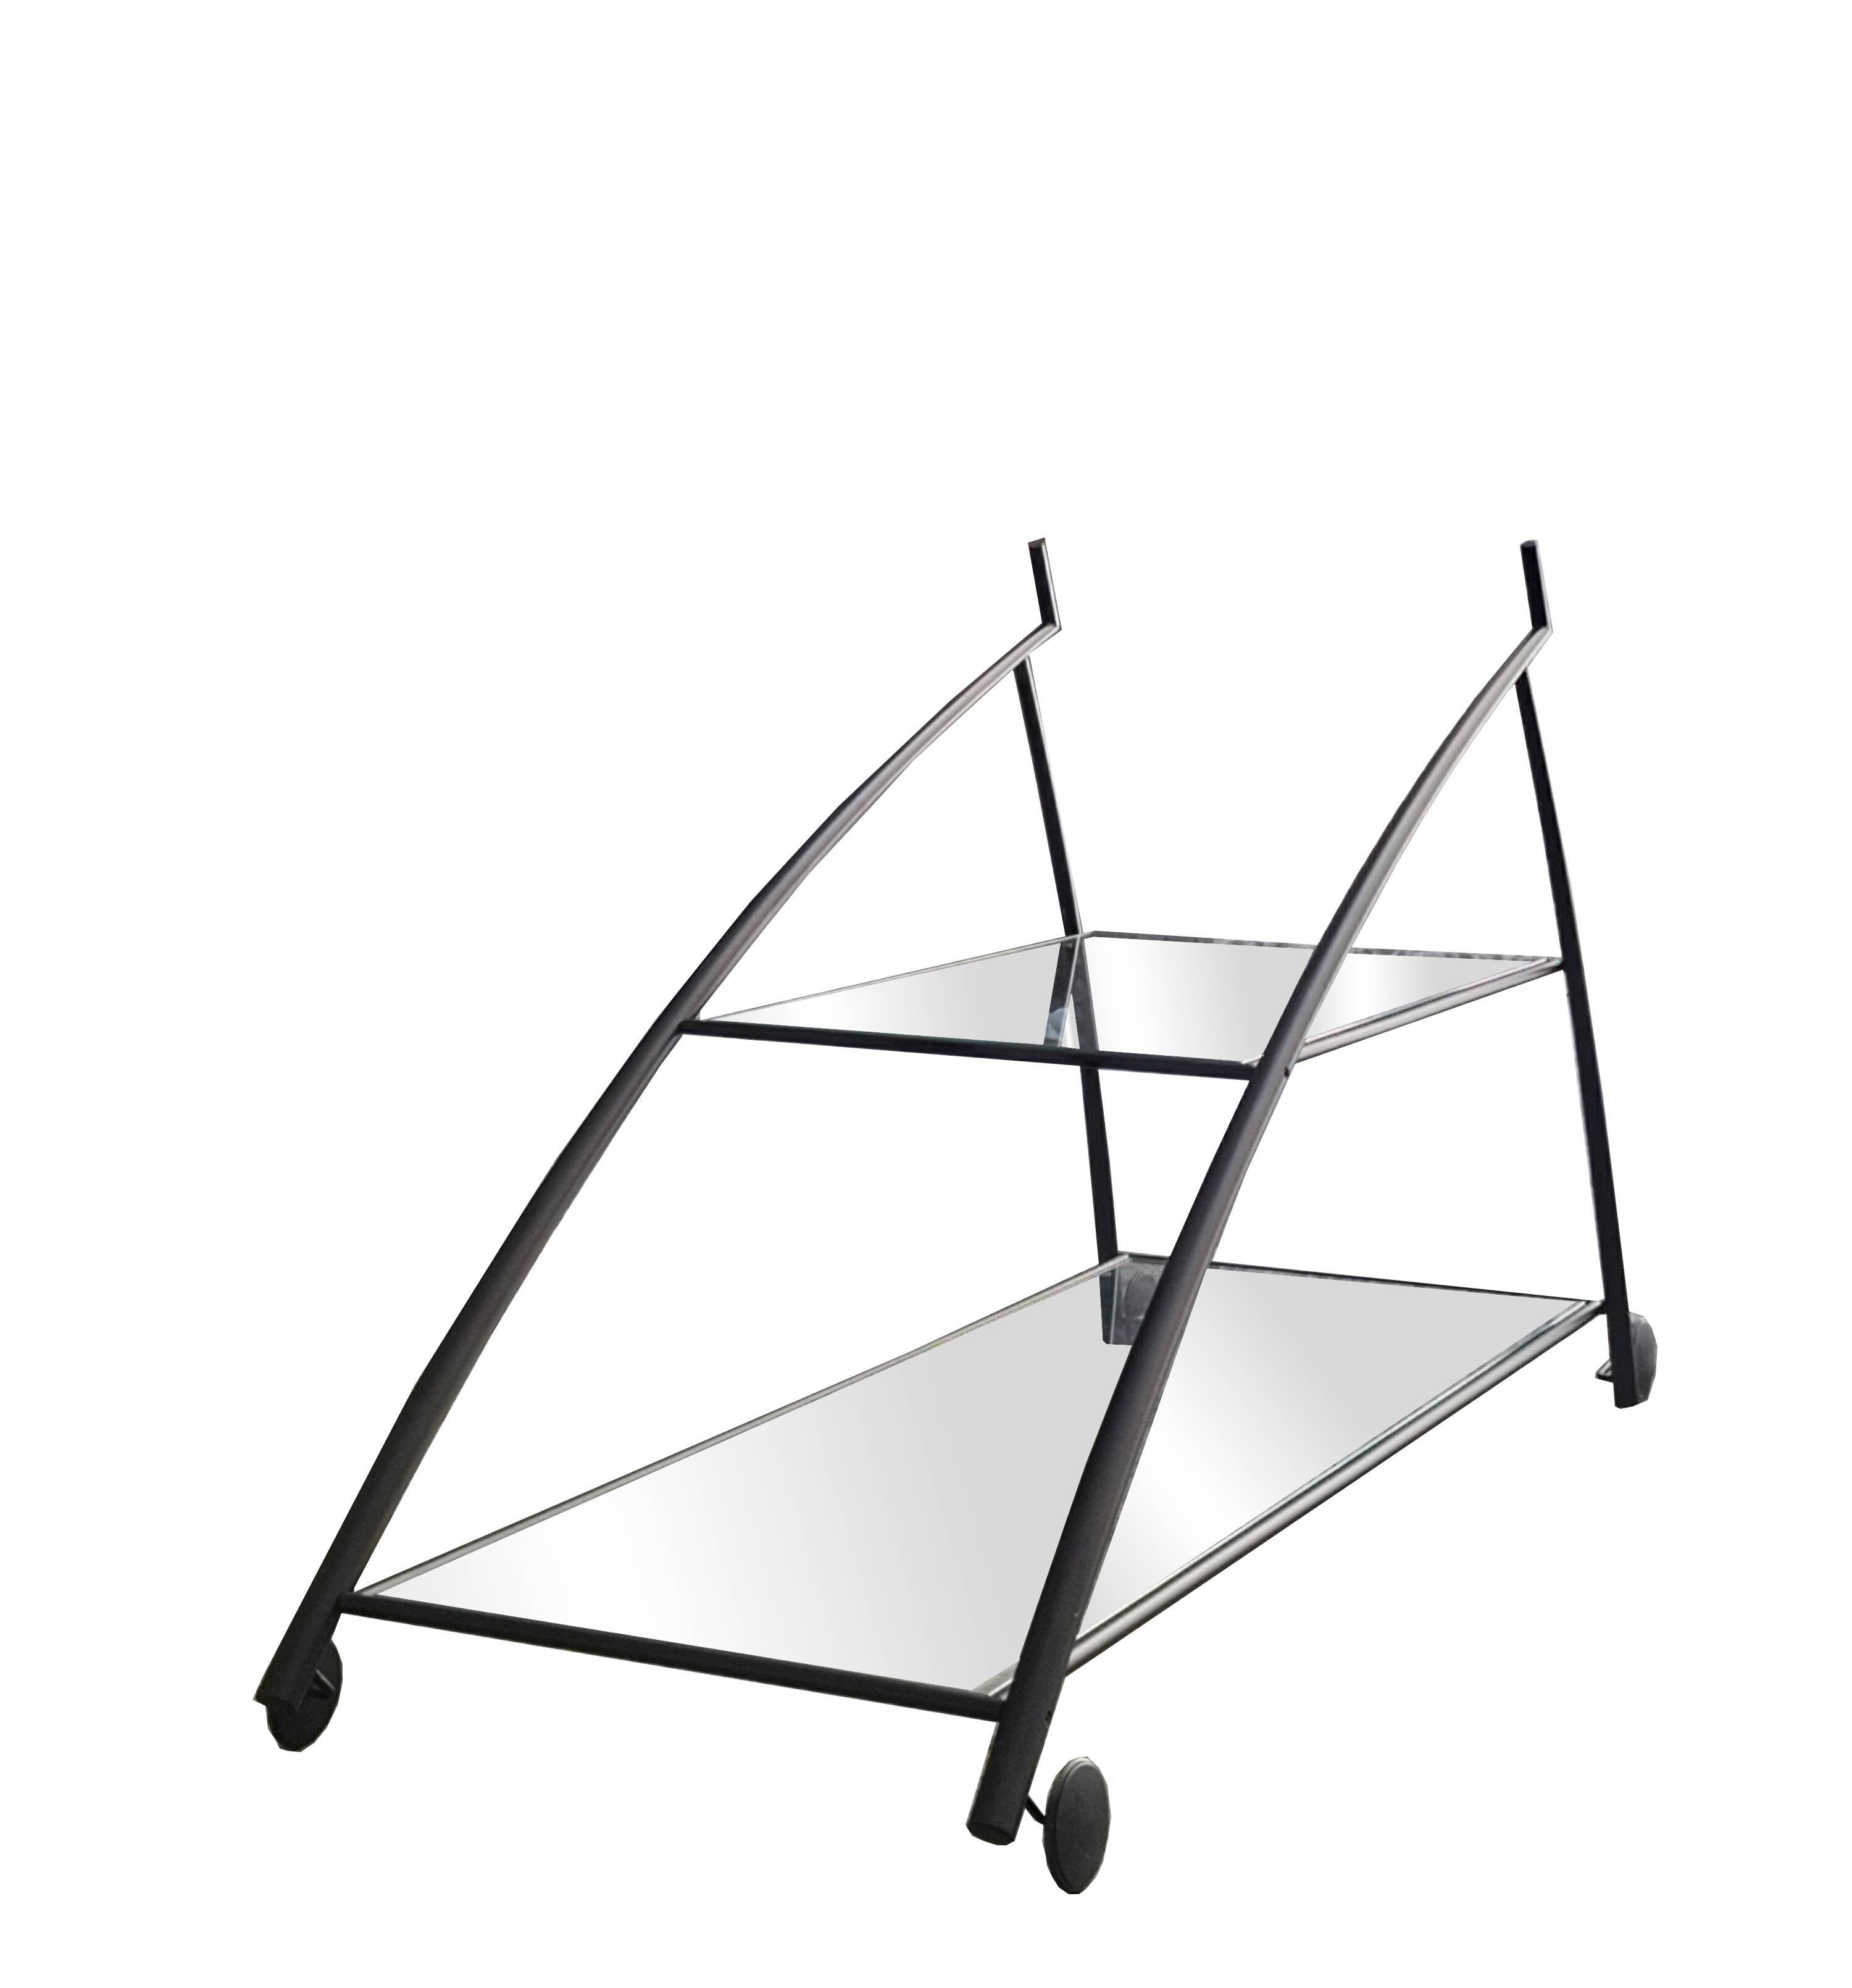 Rare and unique small table/trolley designed by Gilles Derain for the firm Lumen Center,
Black lacquered steel frame and transparent glass, in excellent condition, stamped trademark.
